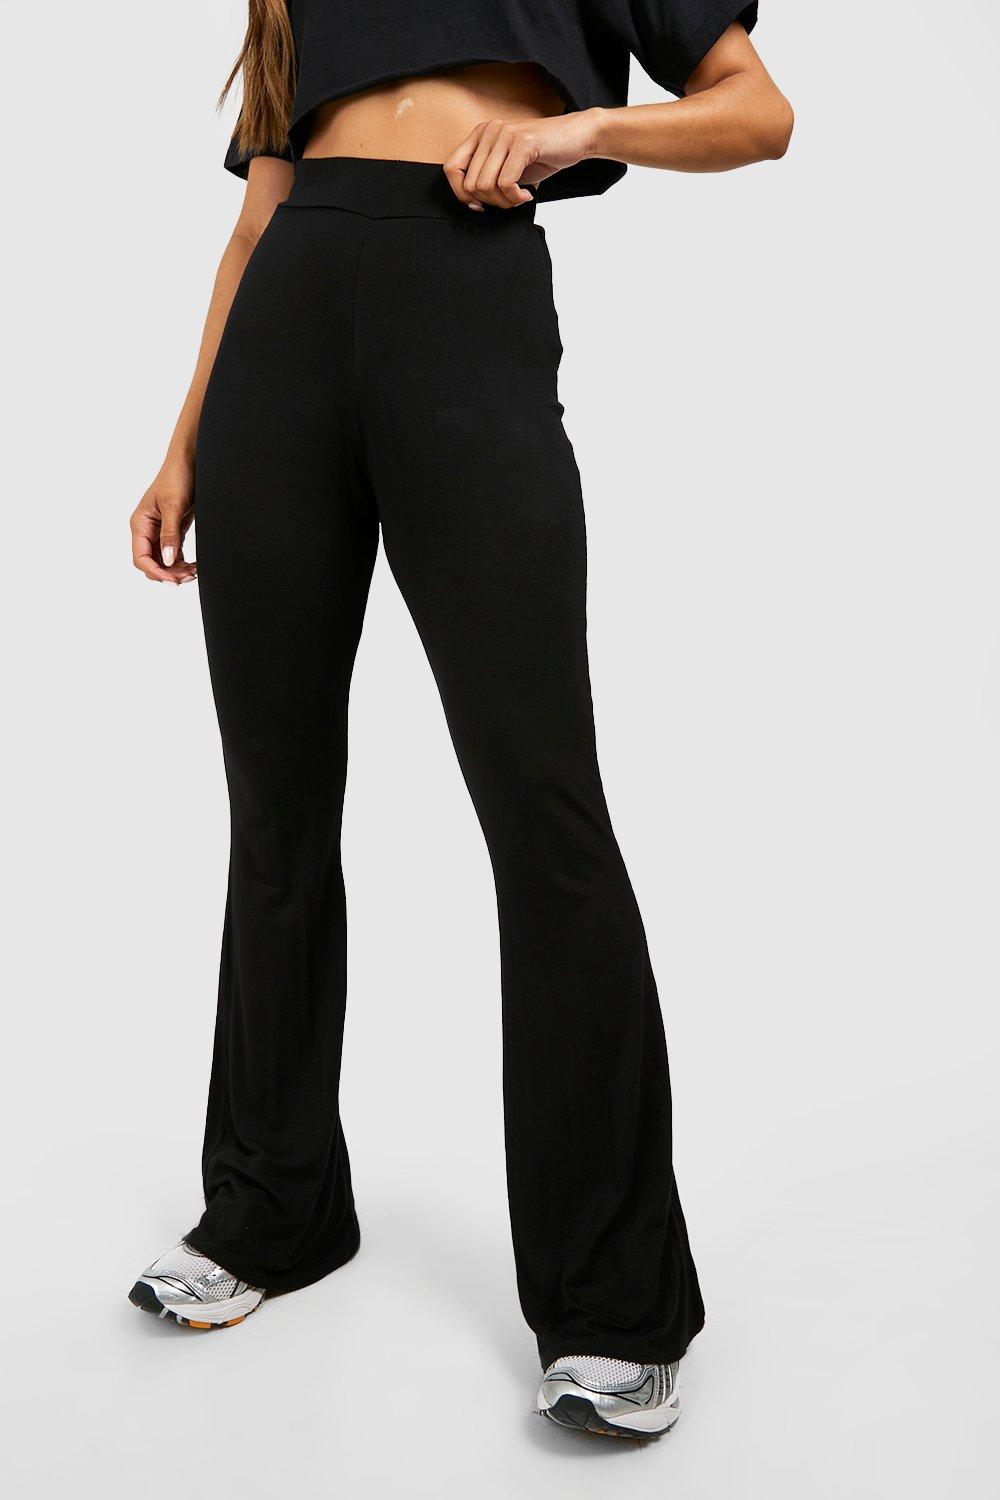 Black High Waist Fitted Flared Pants